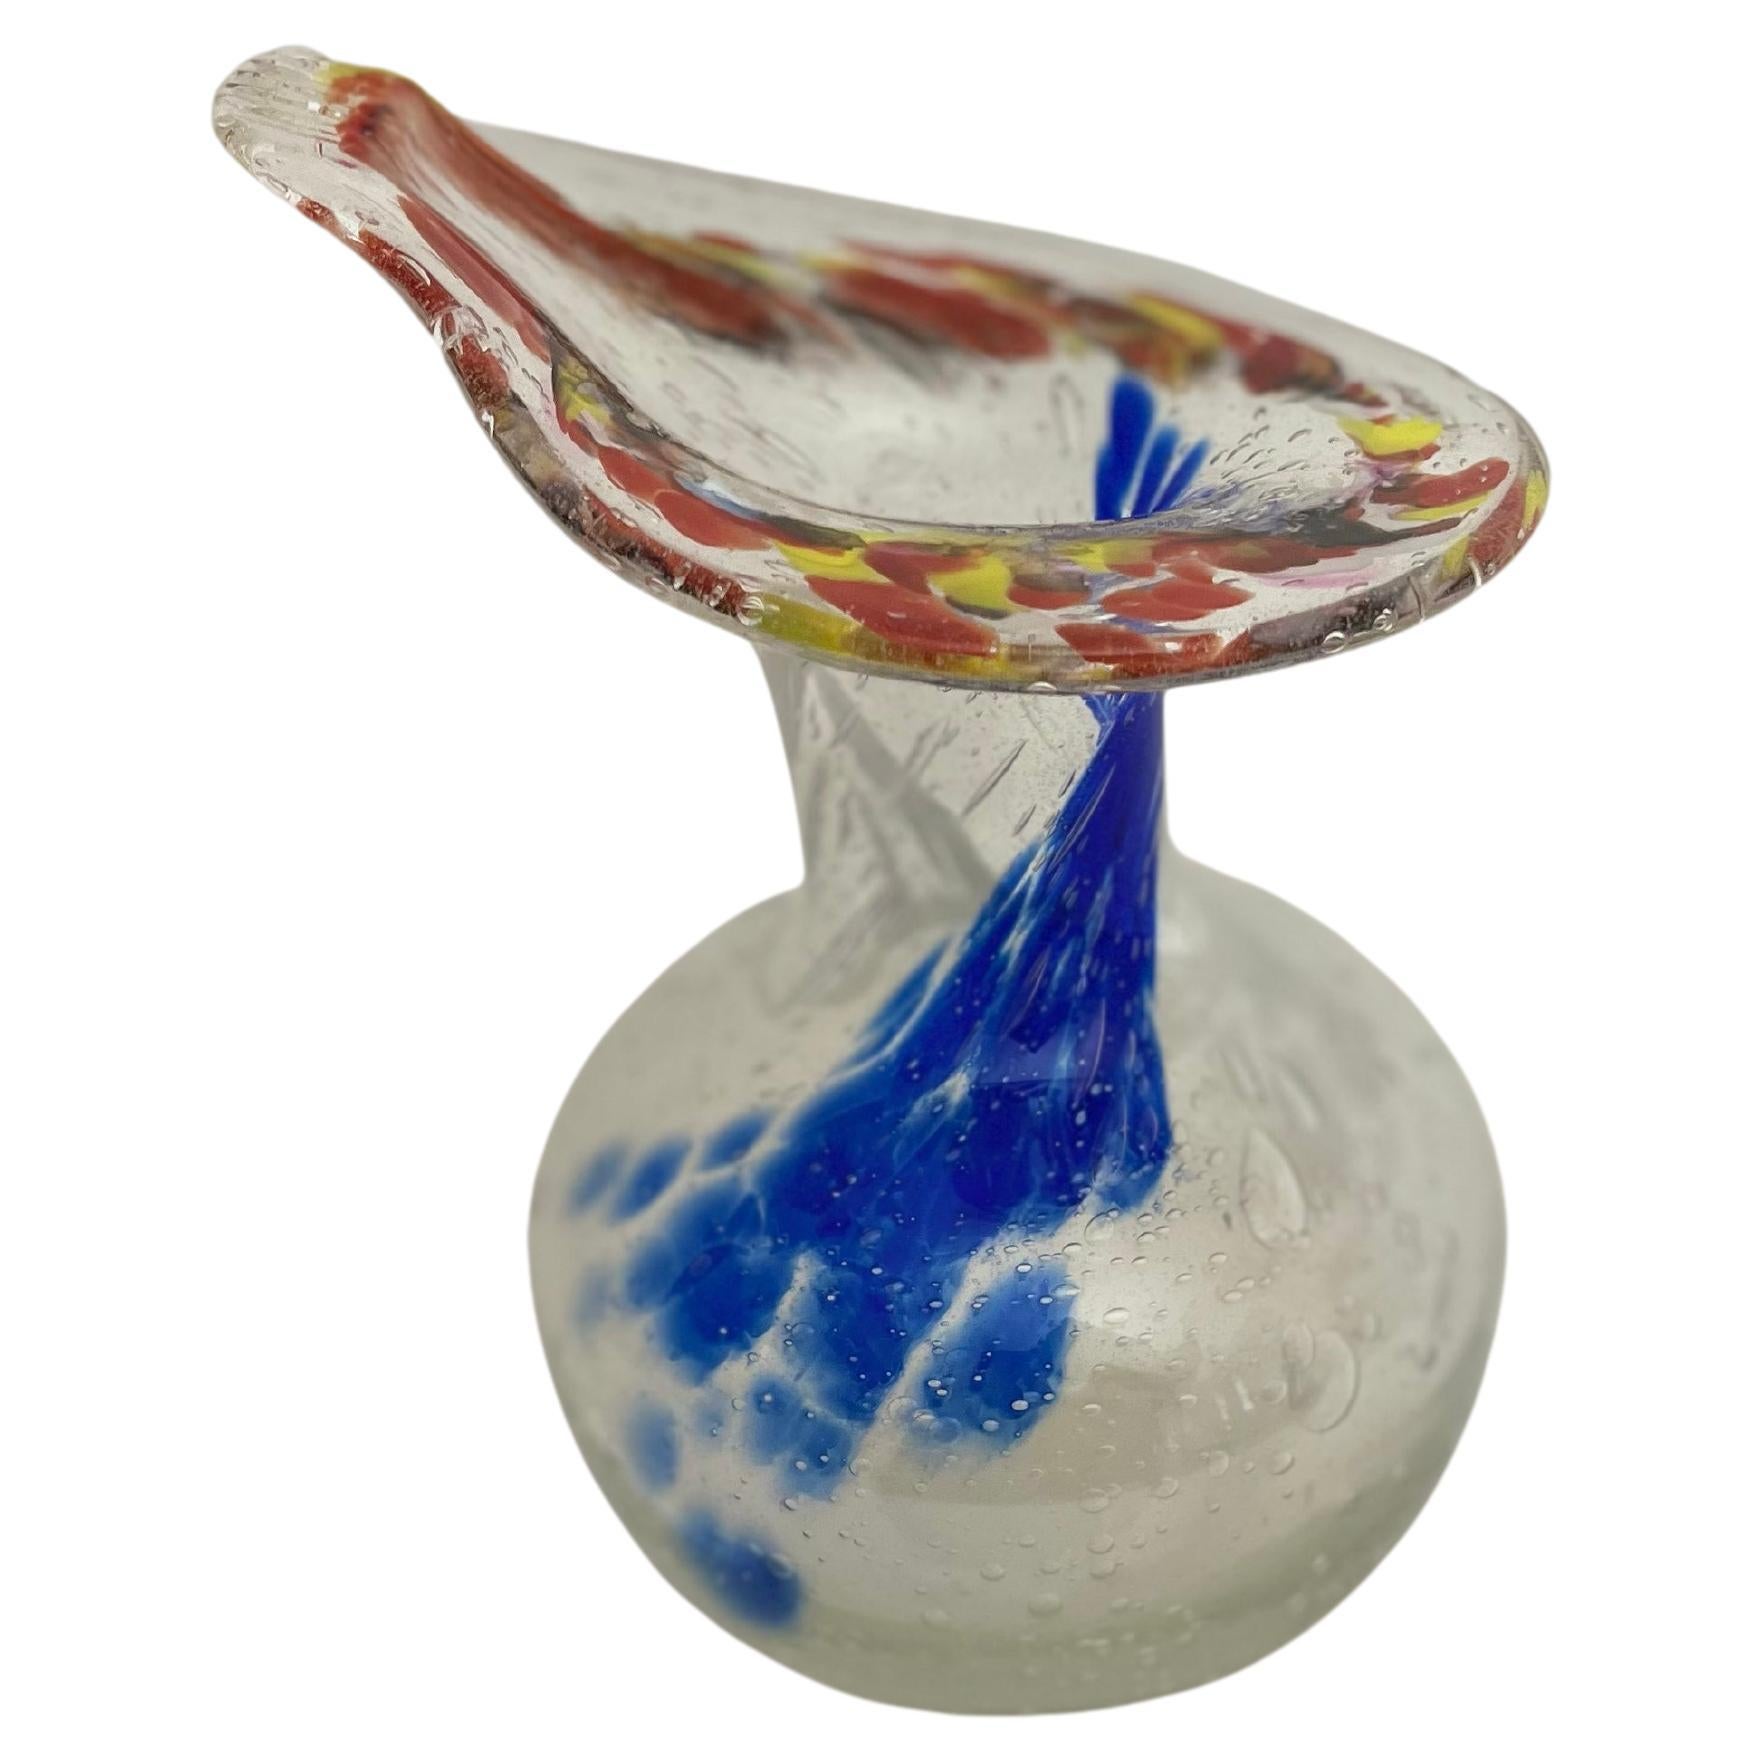 Swedish glass art vase in organic shapes For Sale